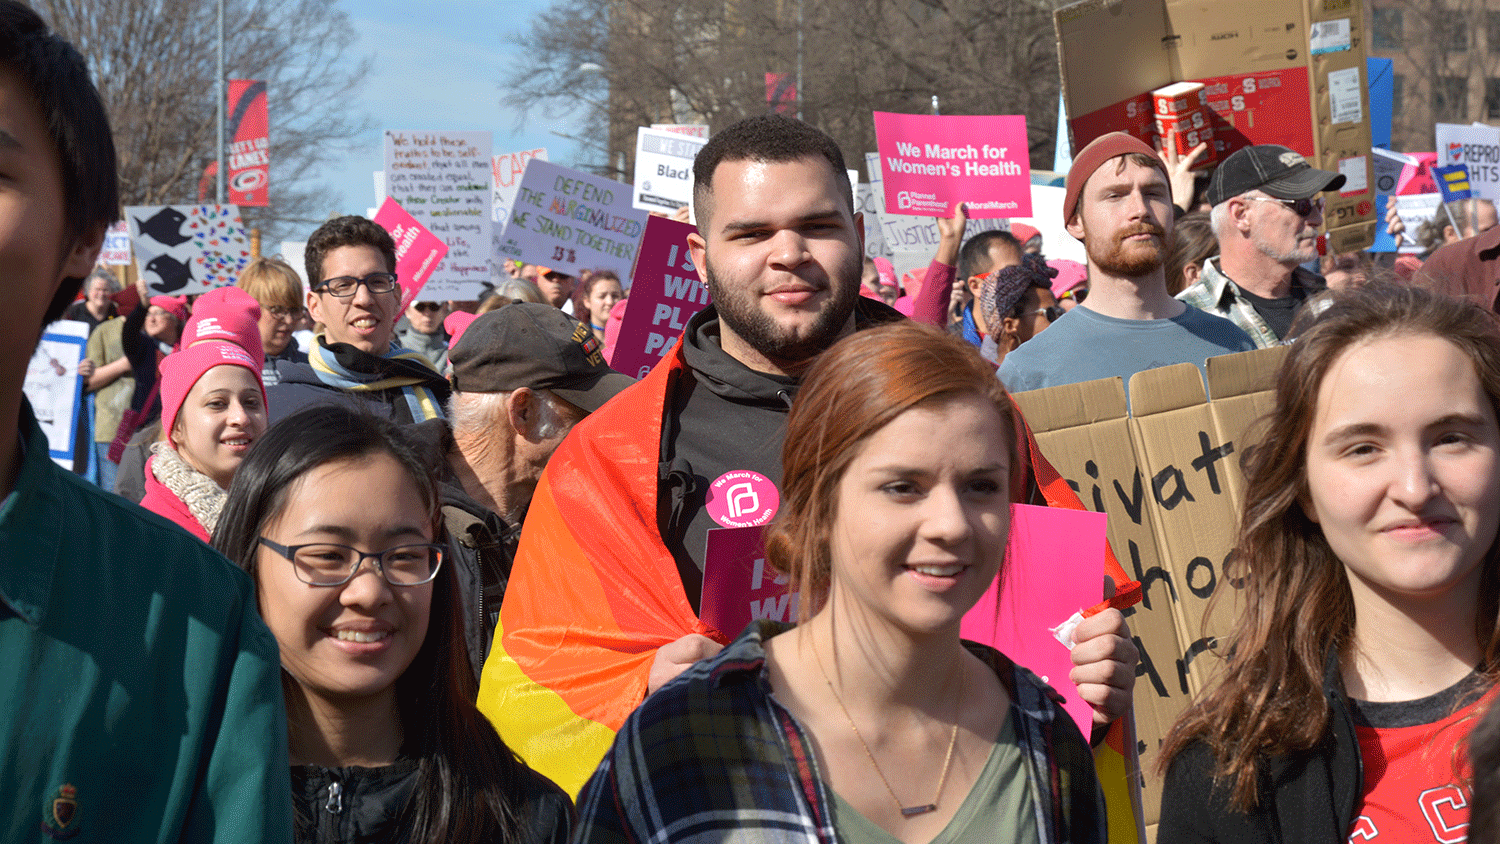 Students marching for social justice